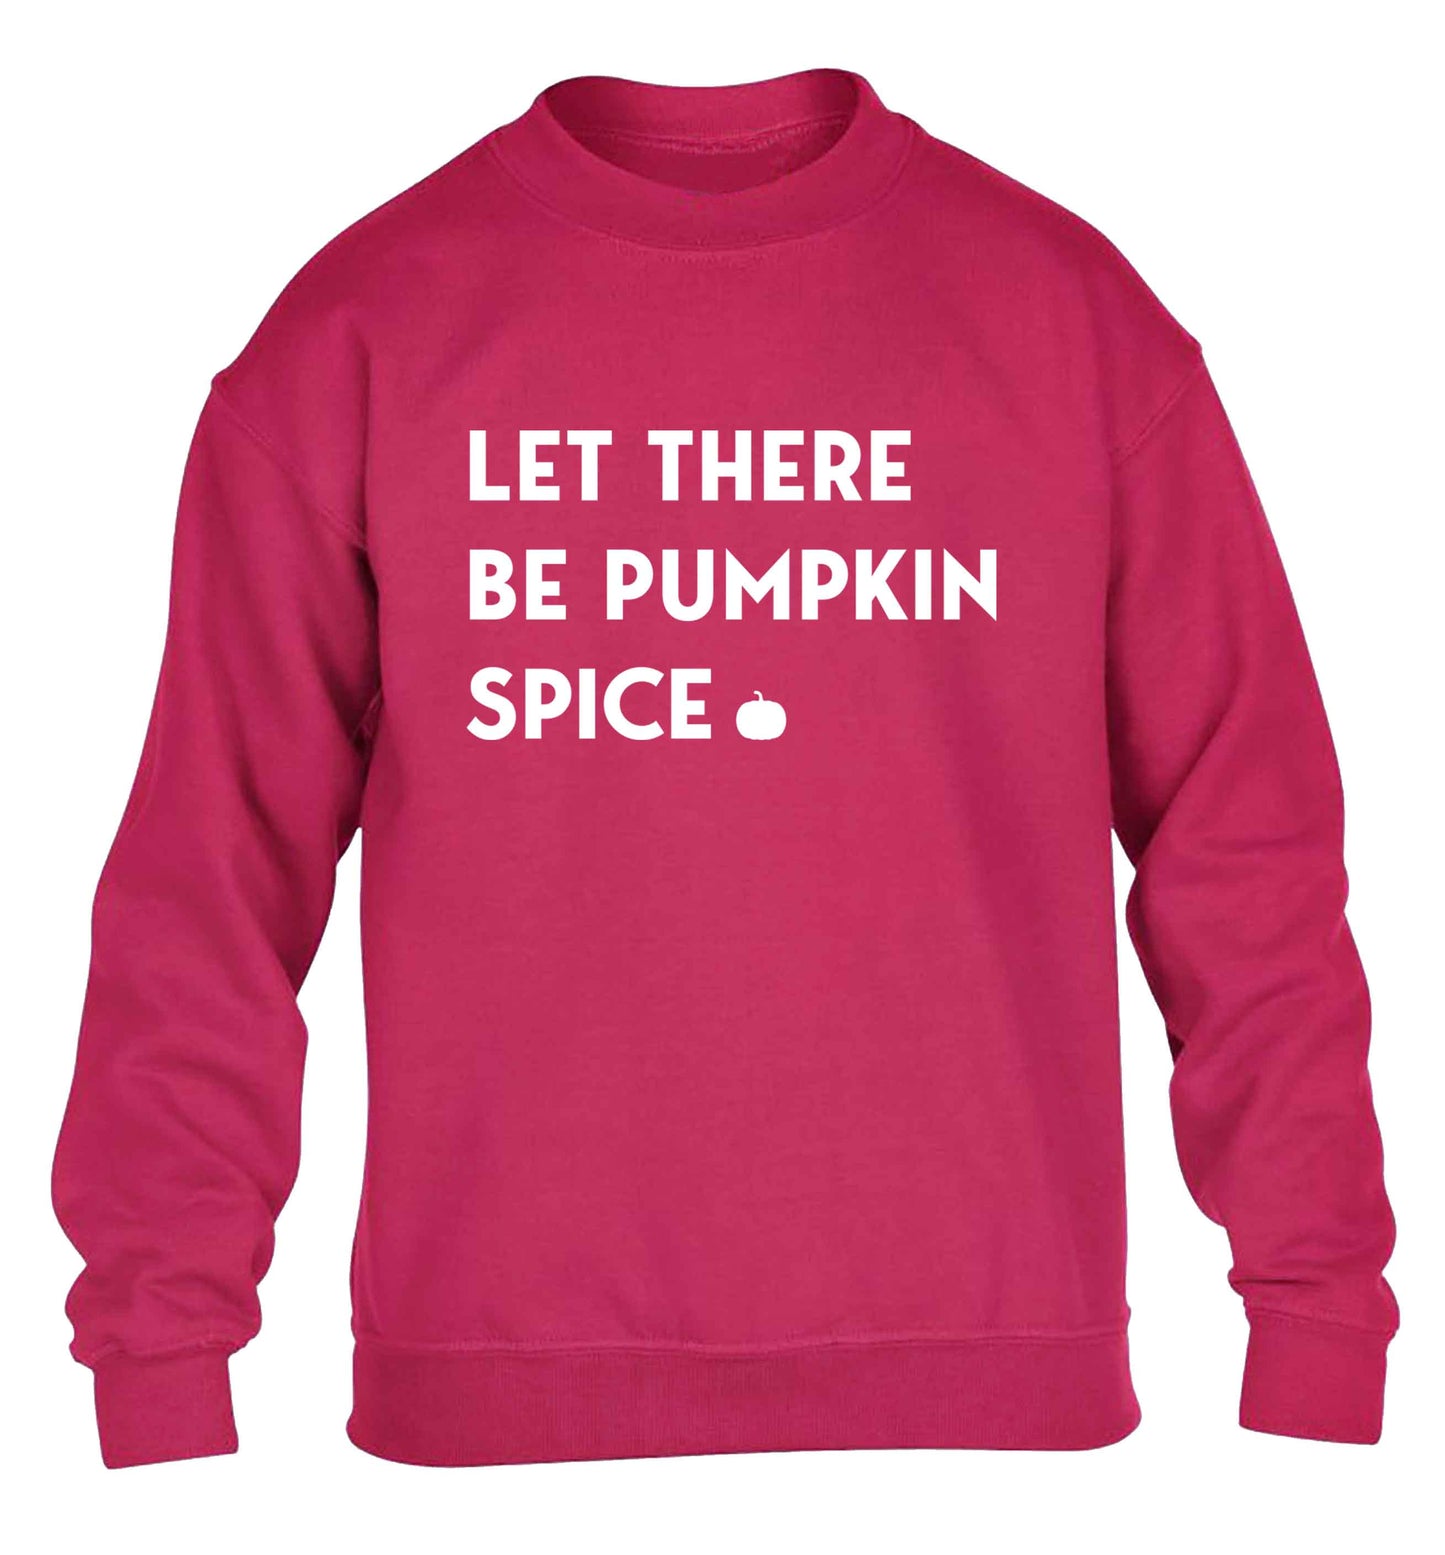 Let Be Pumpkin Spice children's pink sweater 12-13 Years